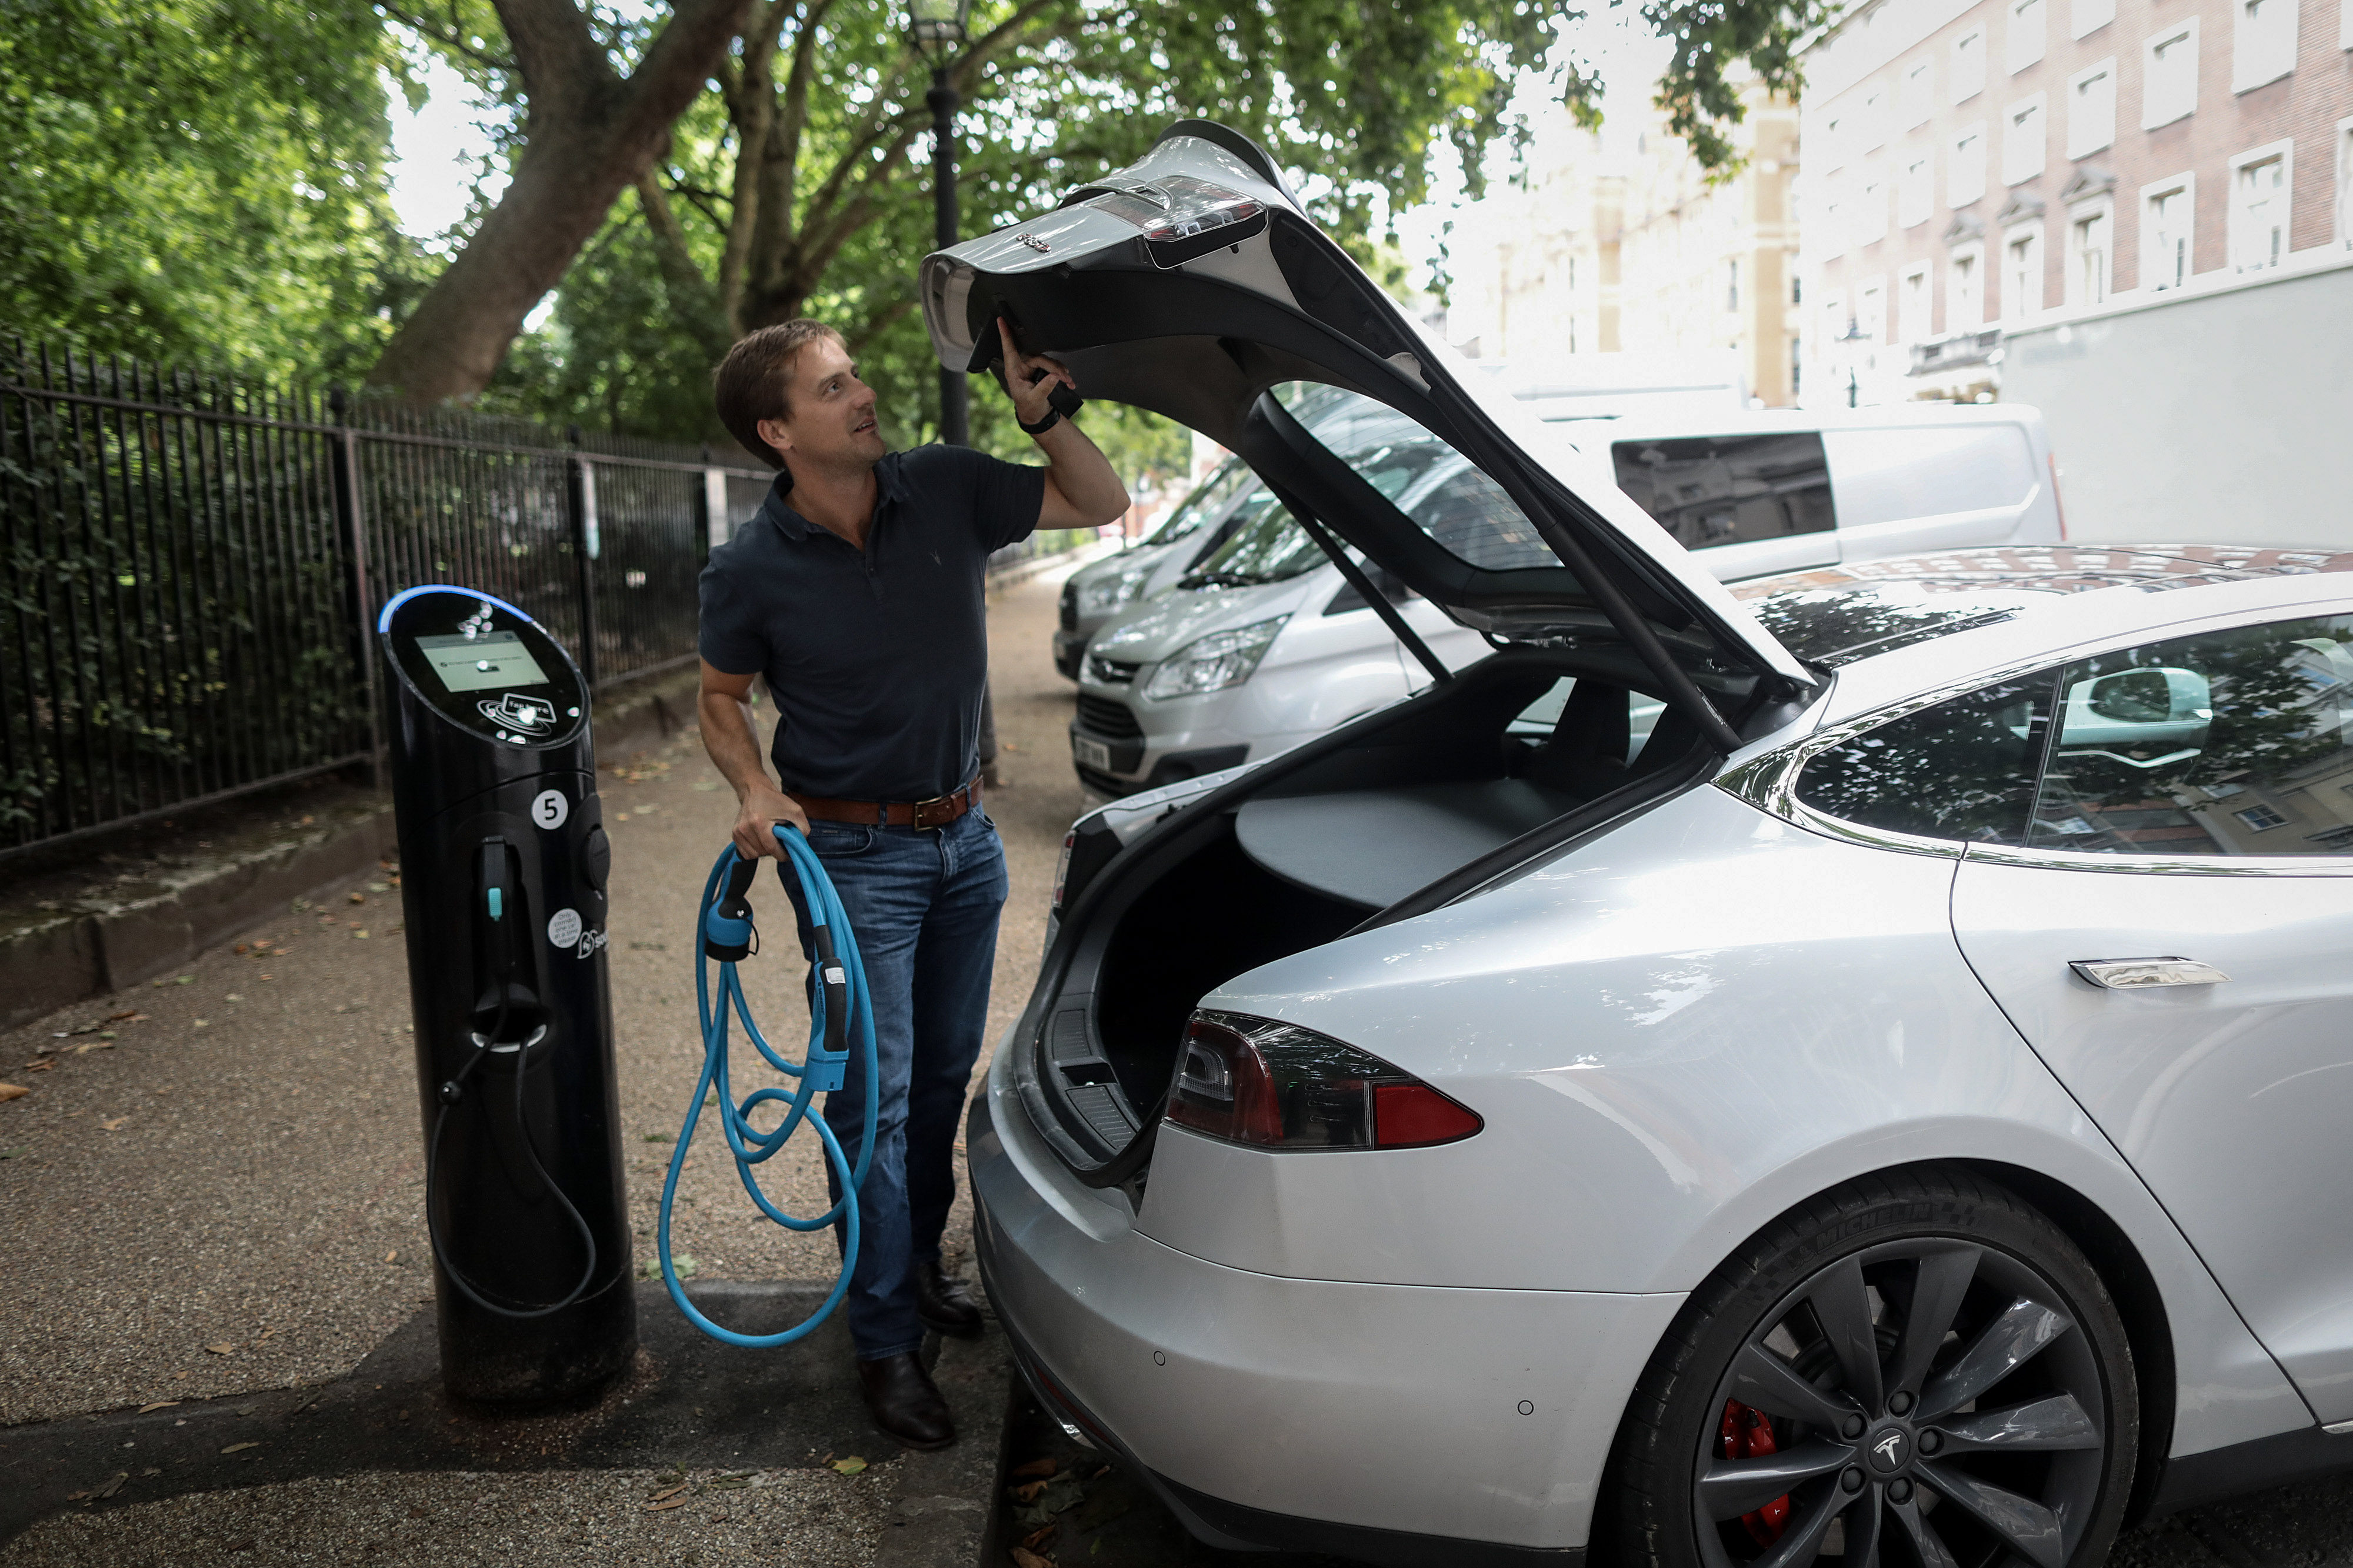  UK insurance broker Howden Group found that the cost of insuring an EV was about double the cost of a traditional combustion-engine car. Photo: Bloomberg